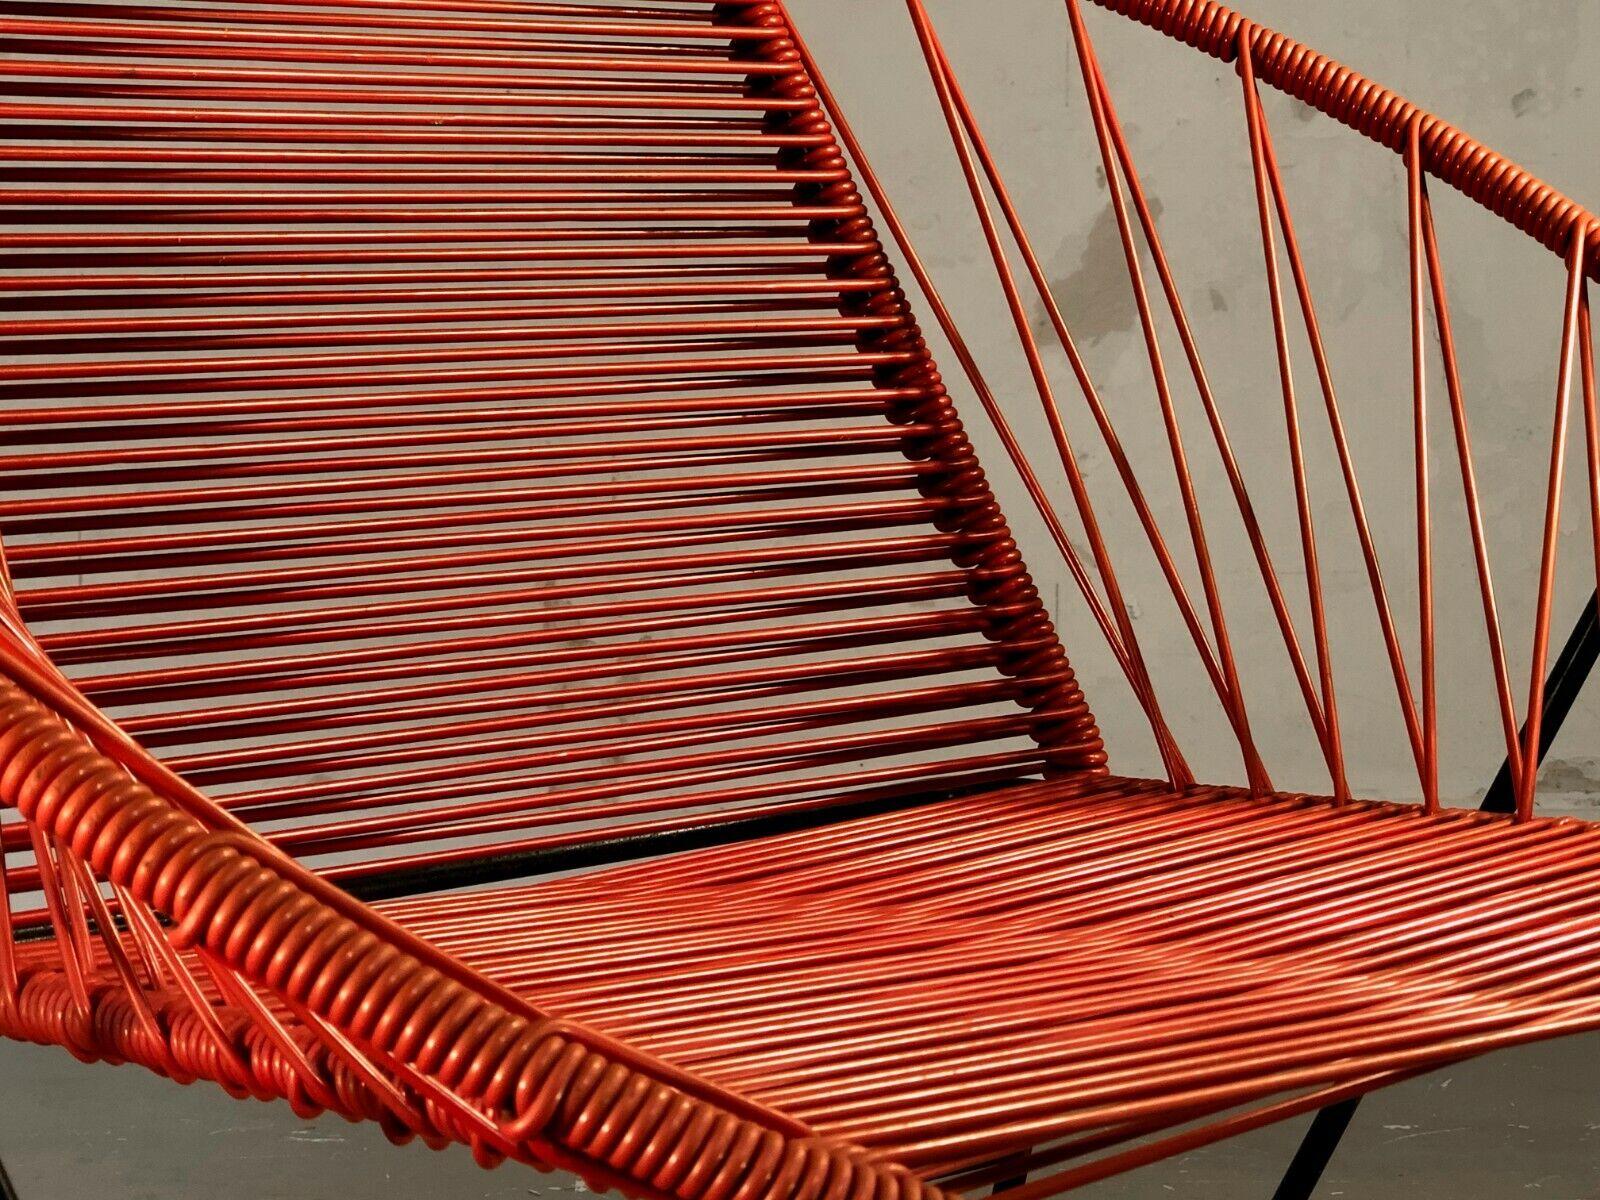 French A MID-CENTURY-MODERN MODERNIST CHAIR Attributed to RAOUL GUYS, France 1950 For Sale